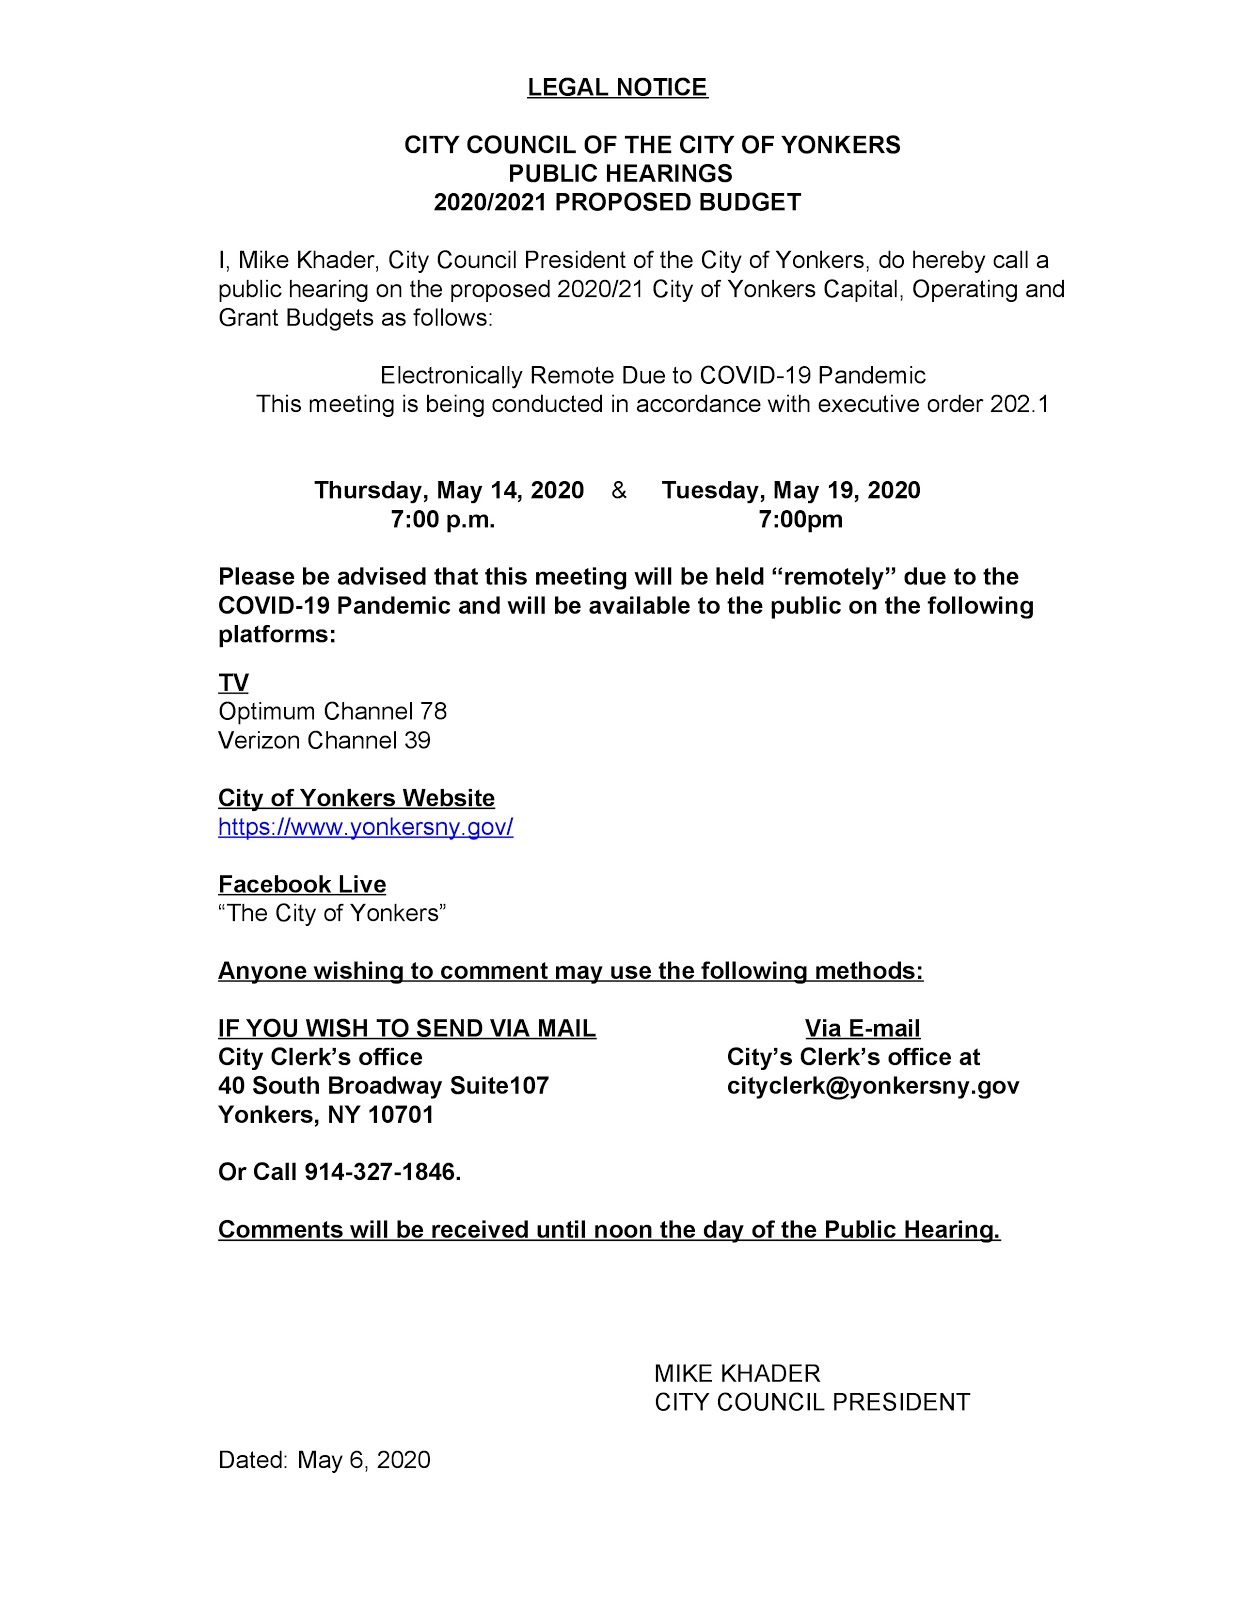 City of Yonkers Legal Notice.